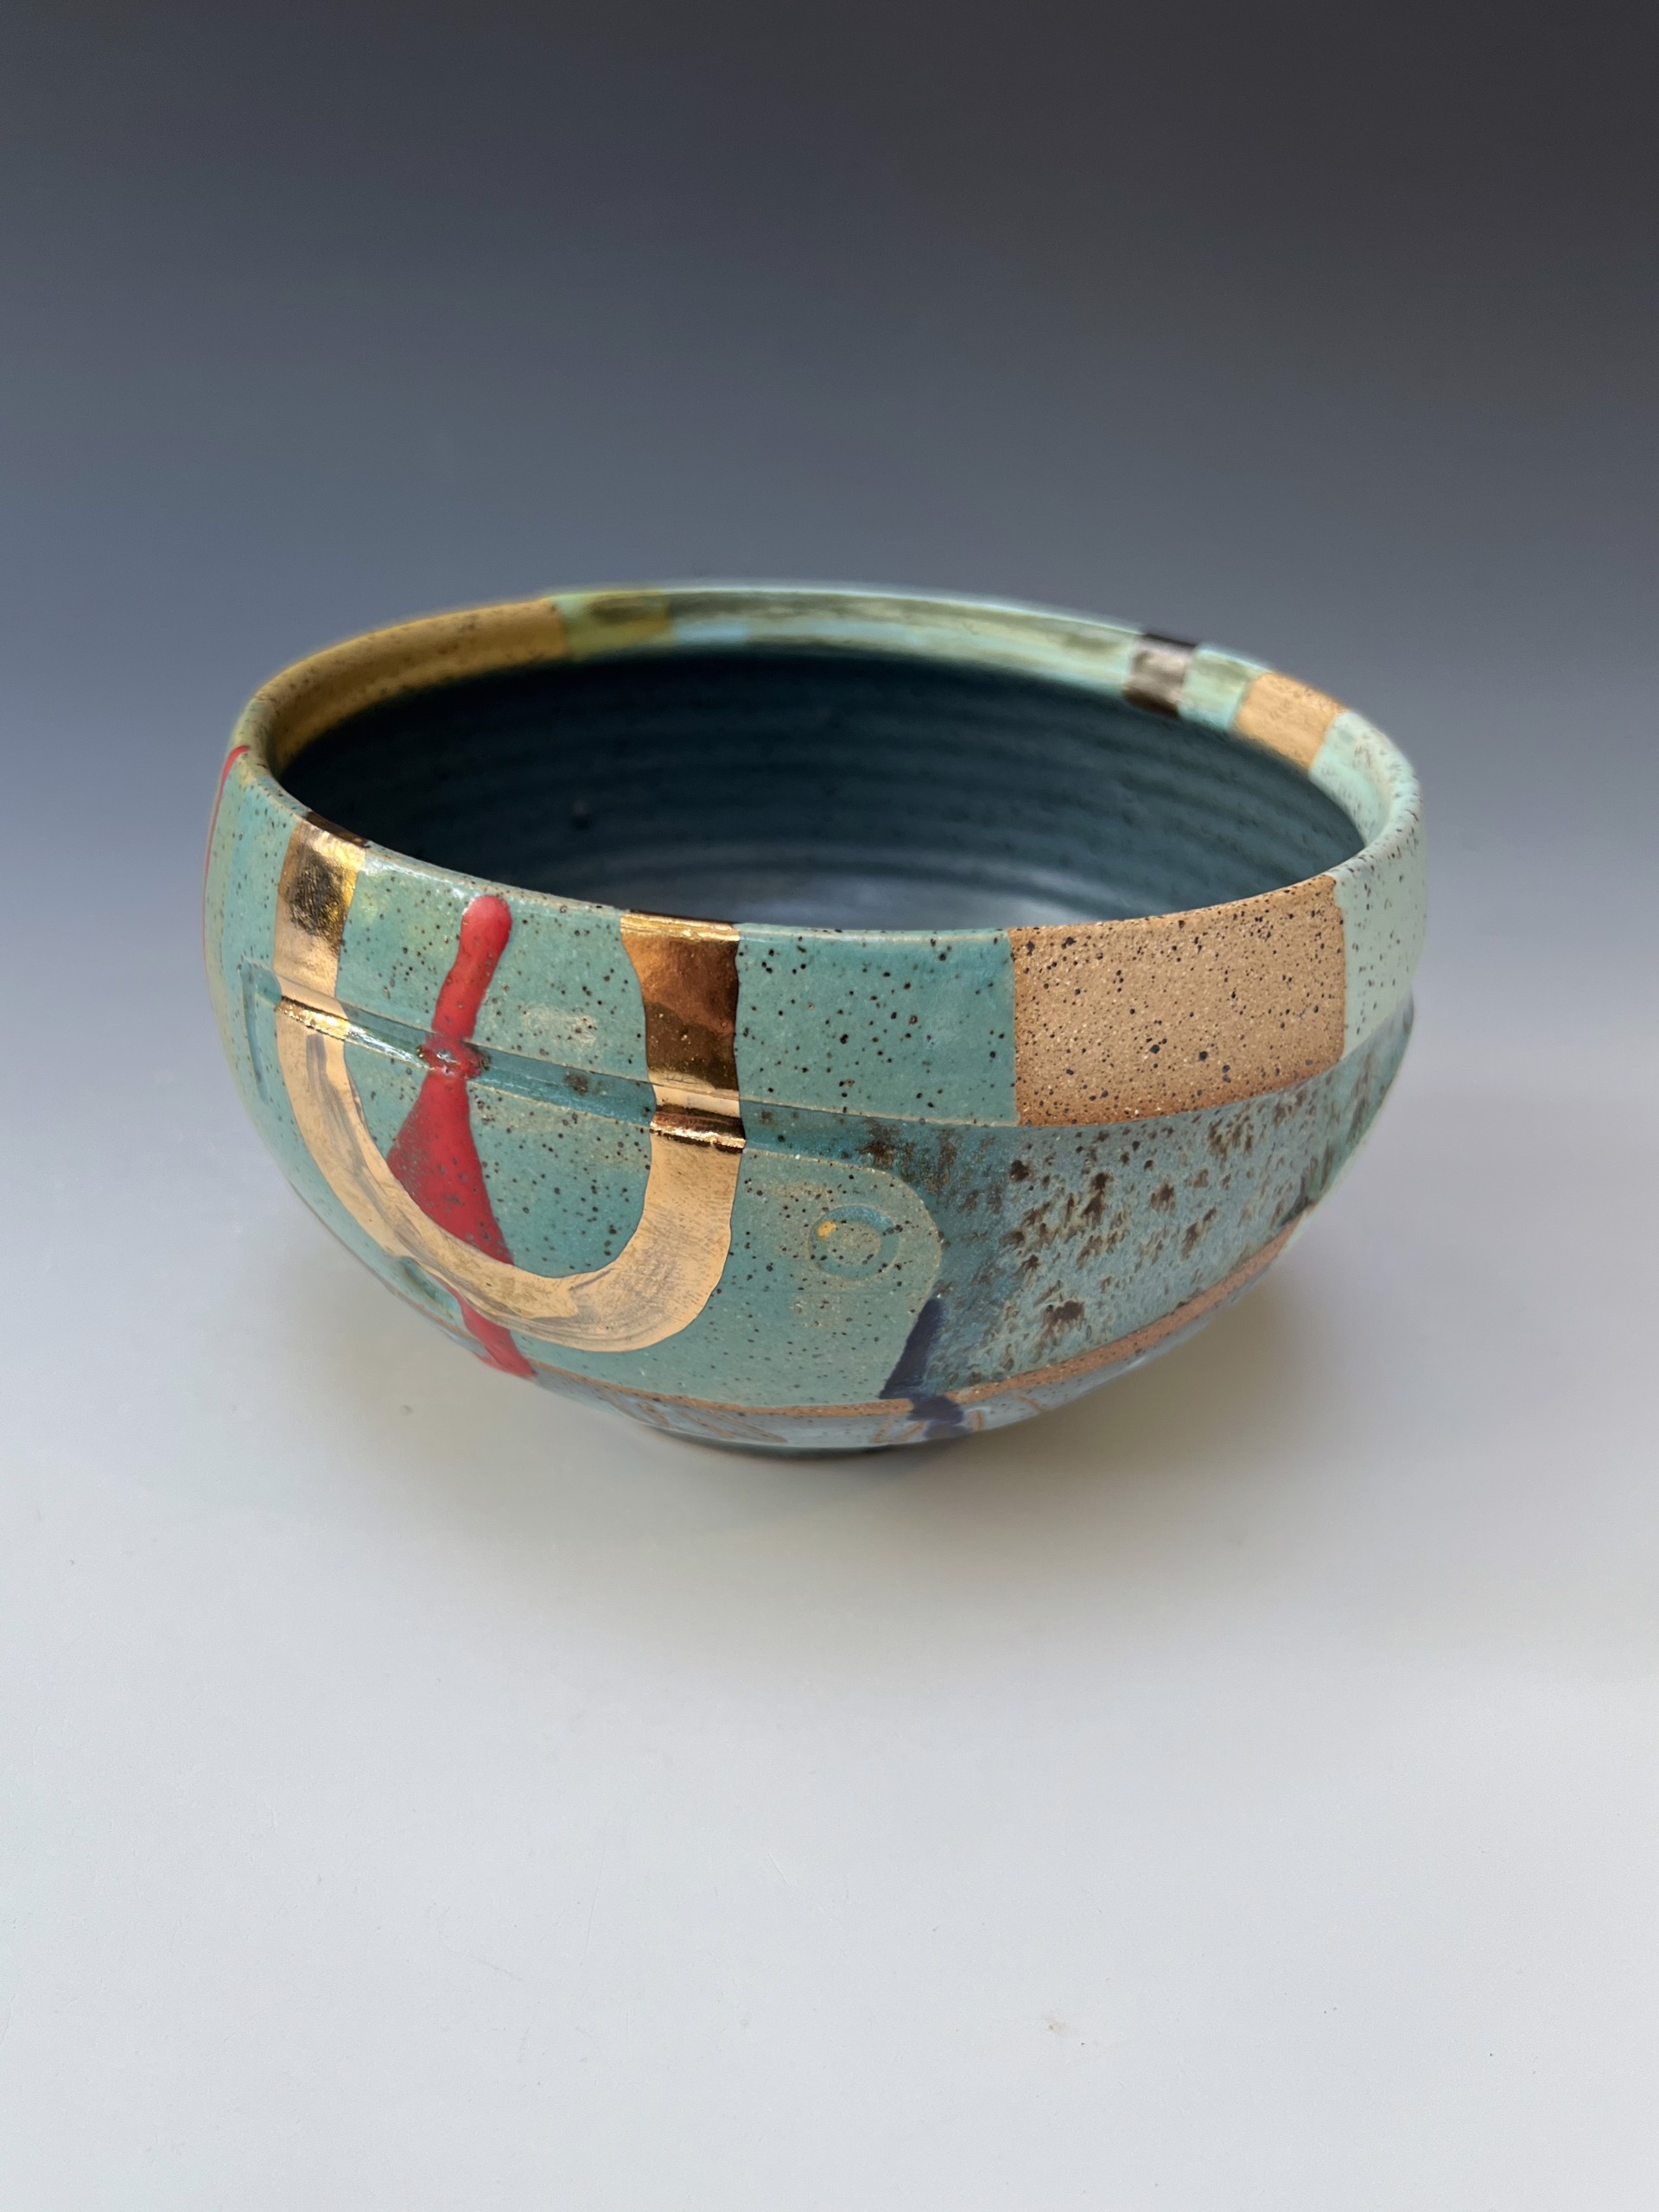 Medium Bowl with Gold Ring by Steve Kelly